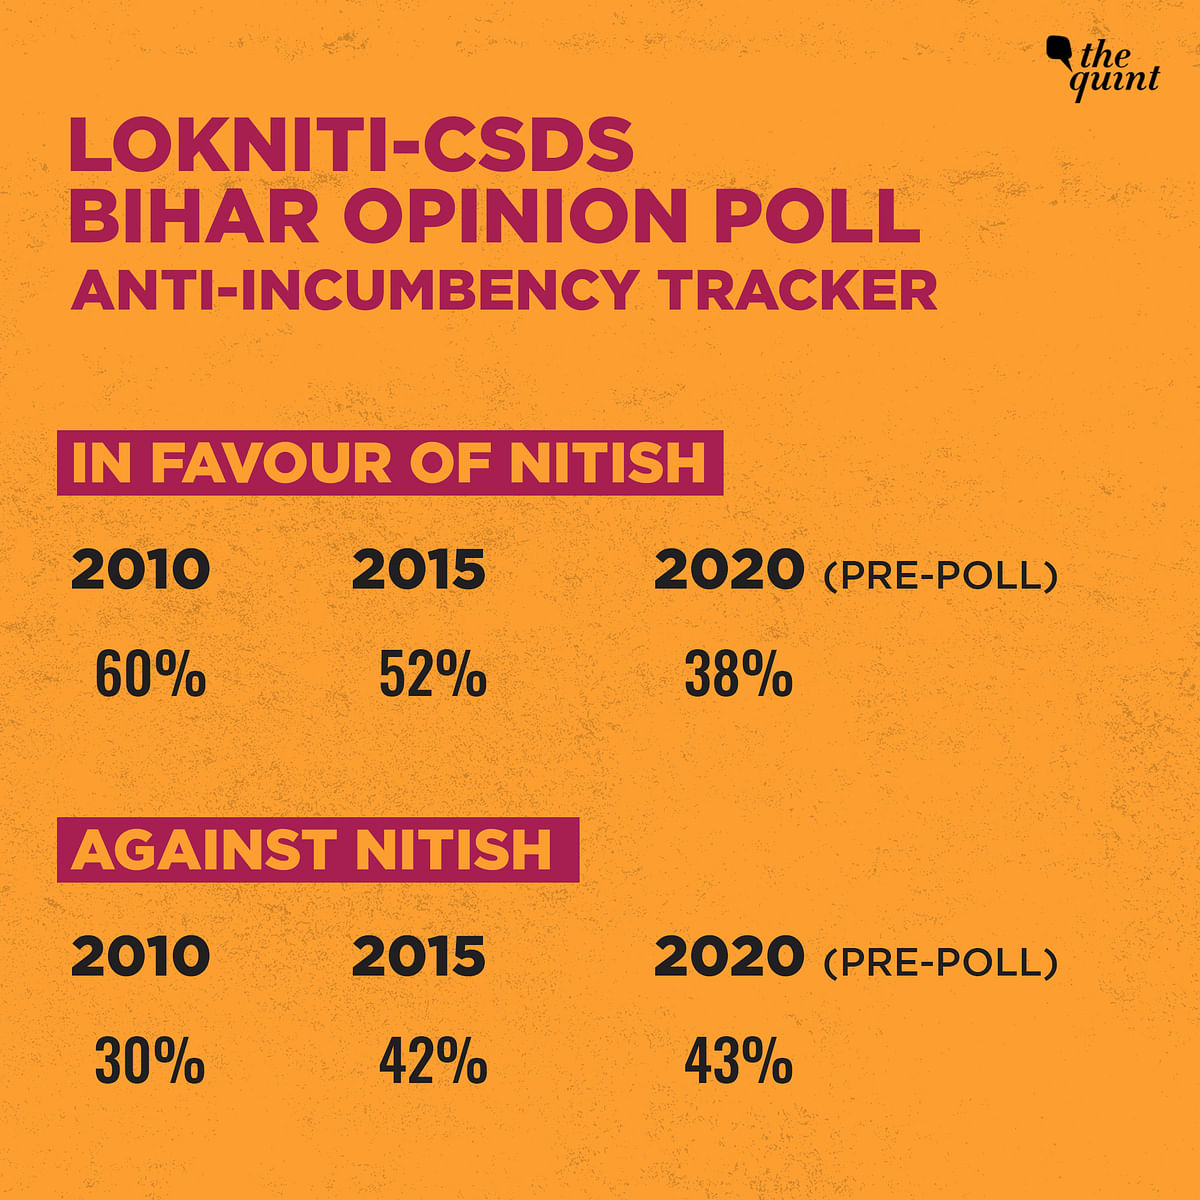 In 2020, only 52% are satisfied with the functioning of Nitish’s government, as opposed to nearly 80% in 2015.